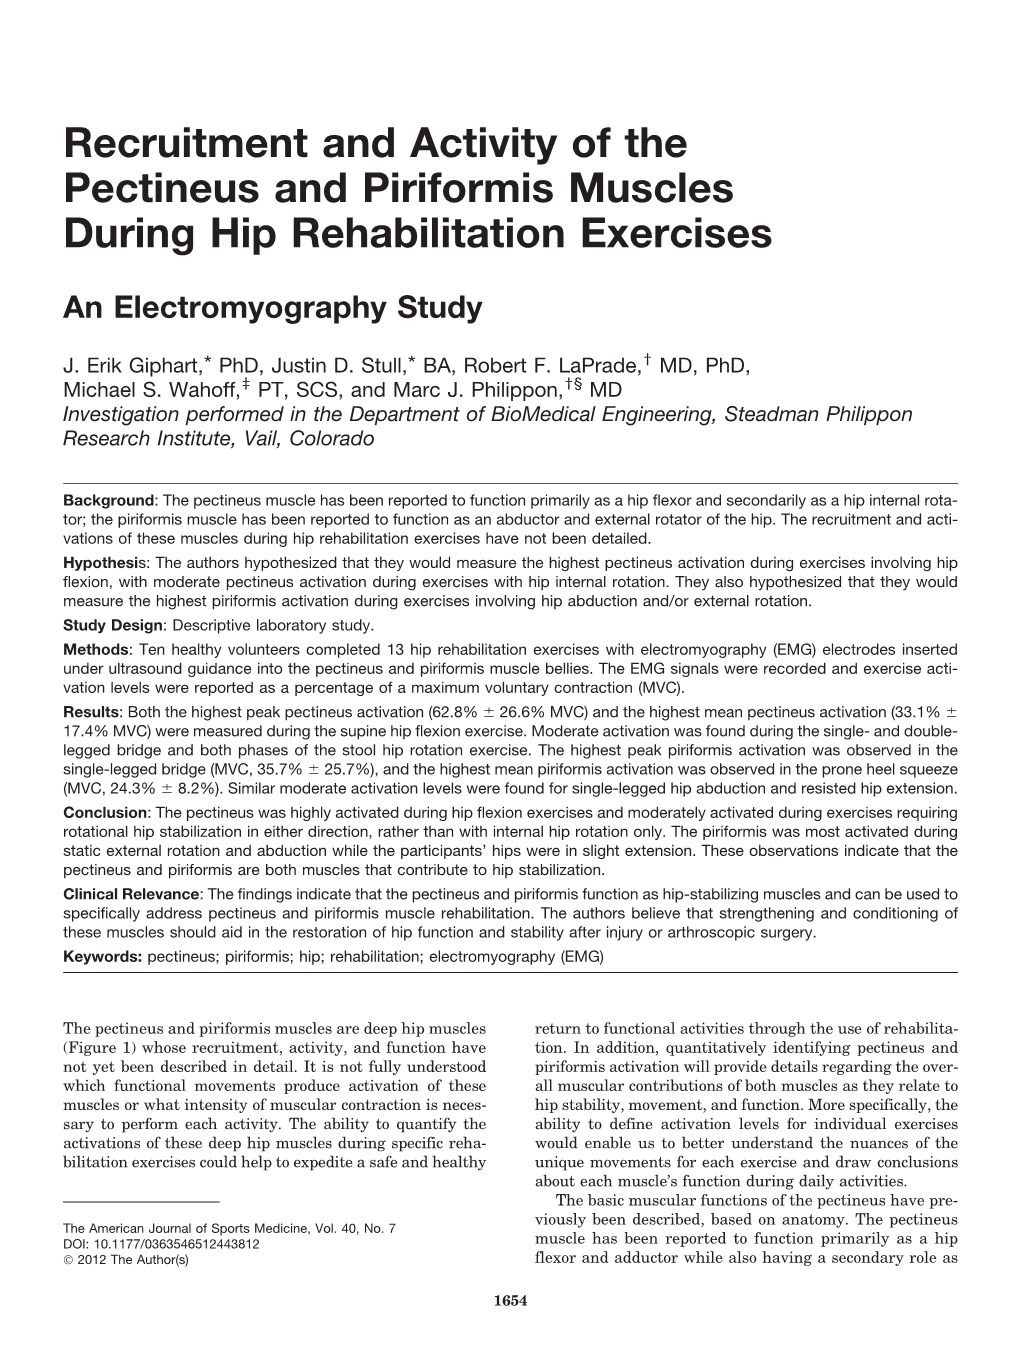 Recruitment and Activity of the Pectineus and Piriformis Muscles During Hip Rehabilitation Exercises